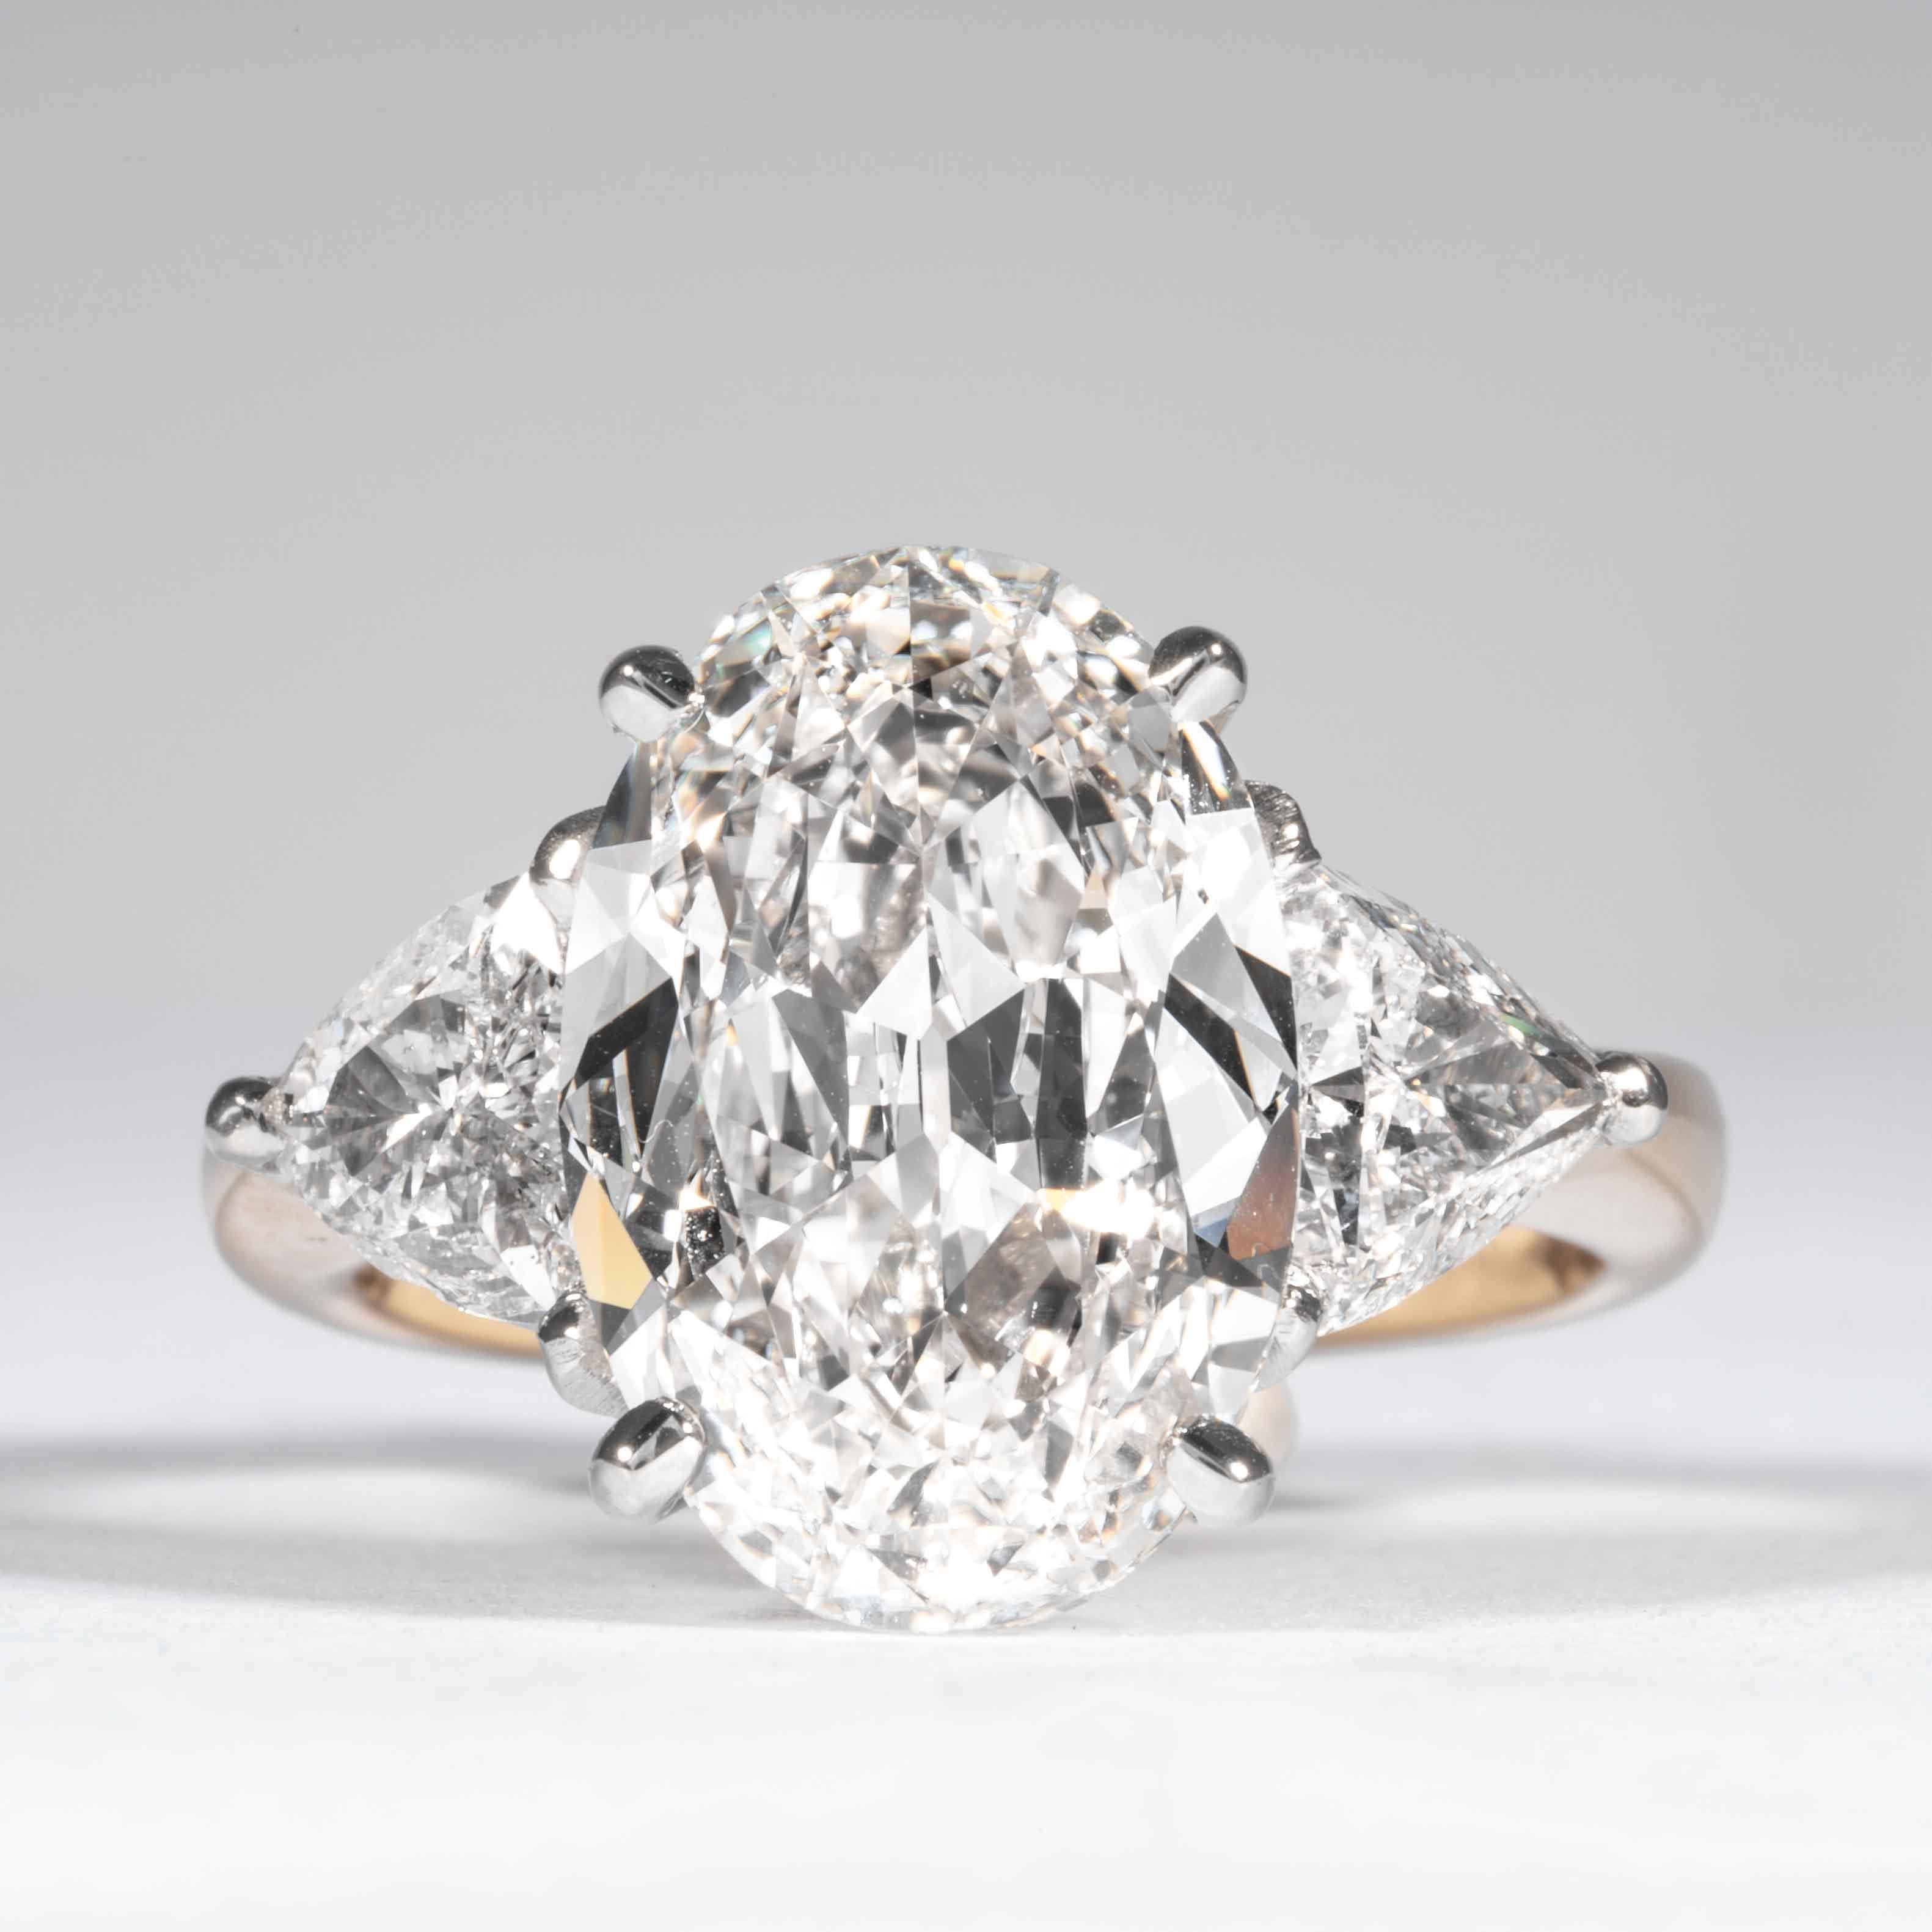 This classic oval cut diamond ring is offered by Shreve, Crump & Low. This 5.03 carat GIA Certified H VS1 Oval cut diamond measuring 14.15 x 9.62 x 4.83mm is custom set in a handcrafted Shreve, Crump & Low classic platinum and 18k yellow gold